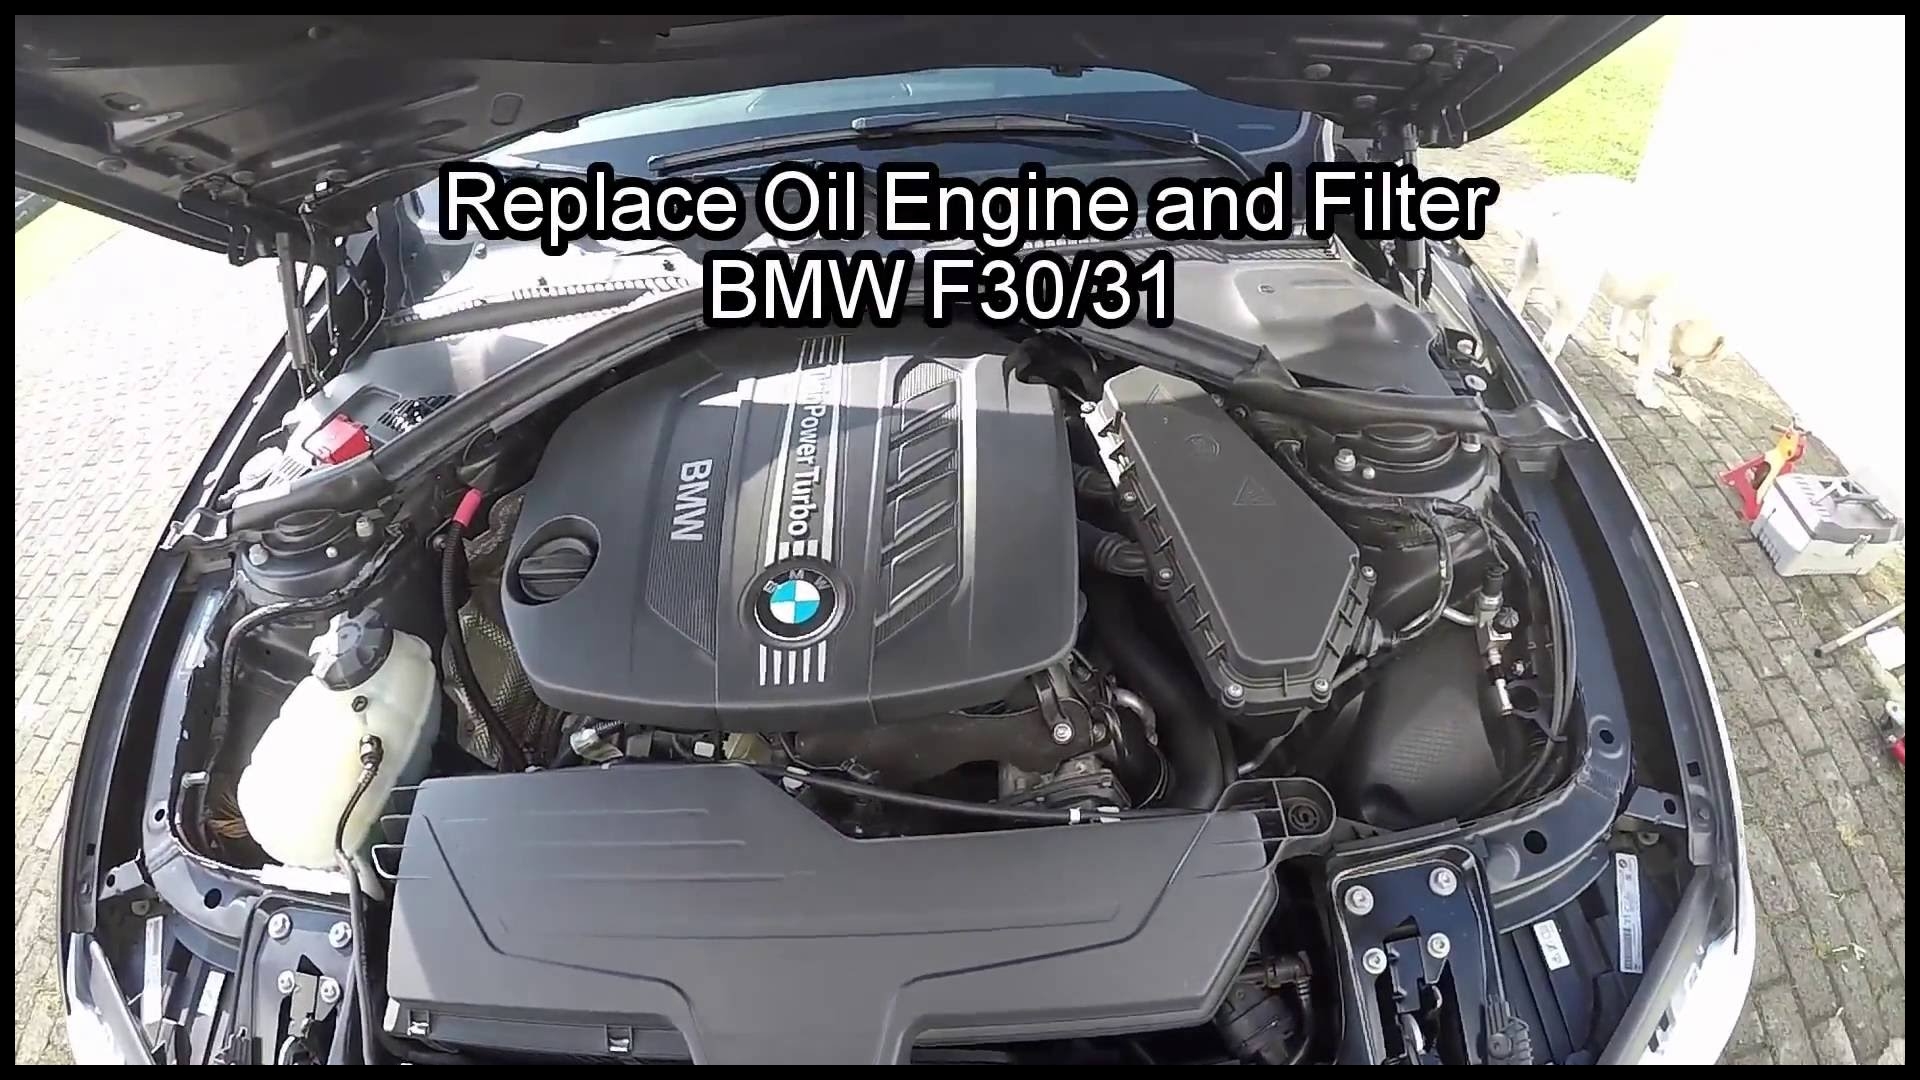 BMW 320 Oil Engine and Oil Filter F30 F31 Replacement